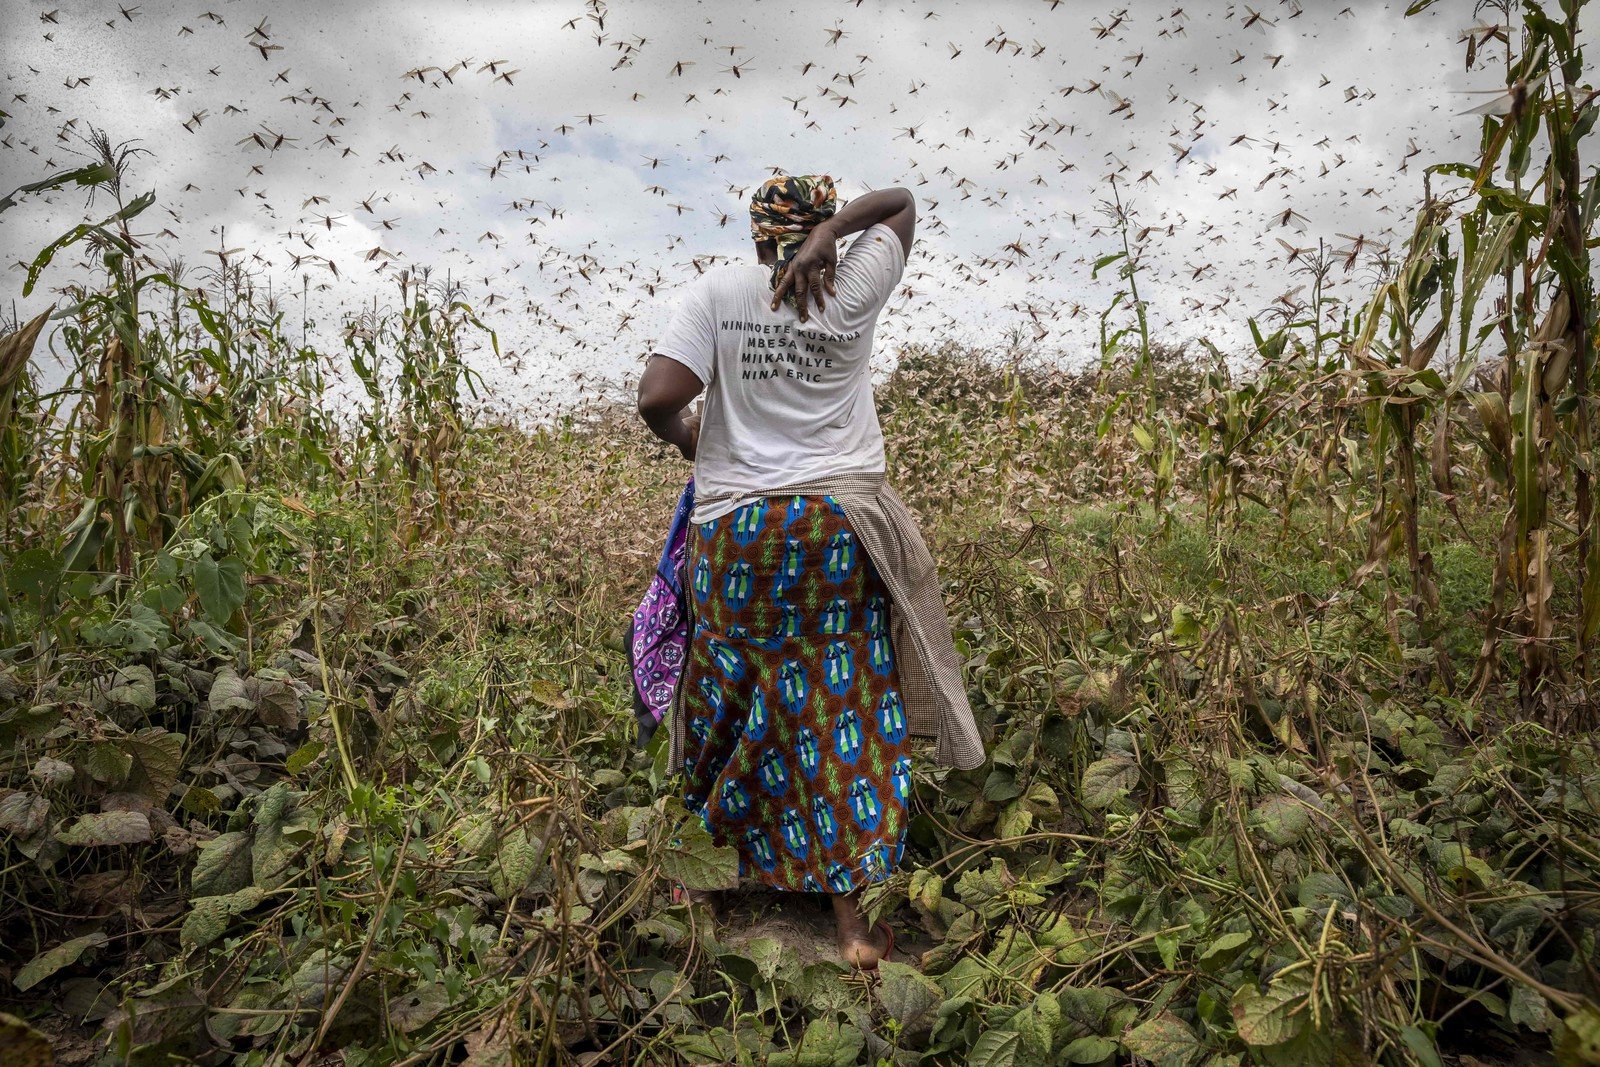 During 2020, and with the current level of approximately 1C of global heating, climate change has fuelled deadly cyclones in India and Bangladesh, huge locust swarms that have devastated crops across Africa and unprecedented heatwaves and wildfires across Australia and the US. No one is immune but it is the poorest and most marginalized people who are hardest hit. (Photo: FAO/Sven Torfinn)